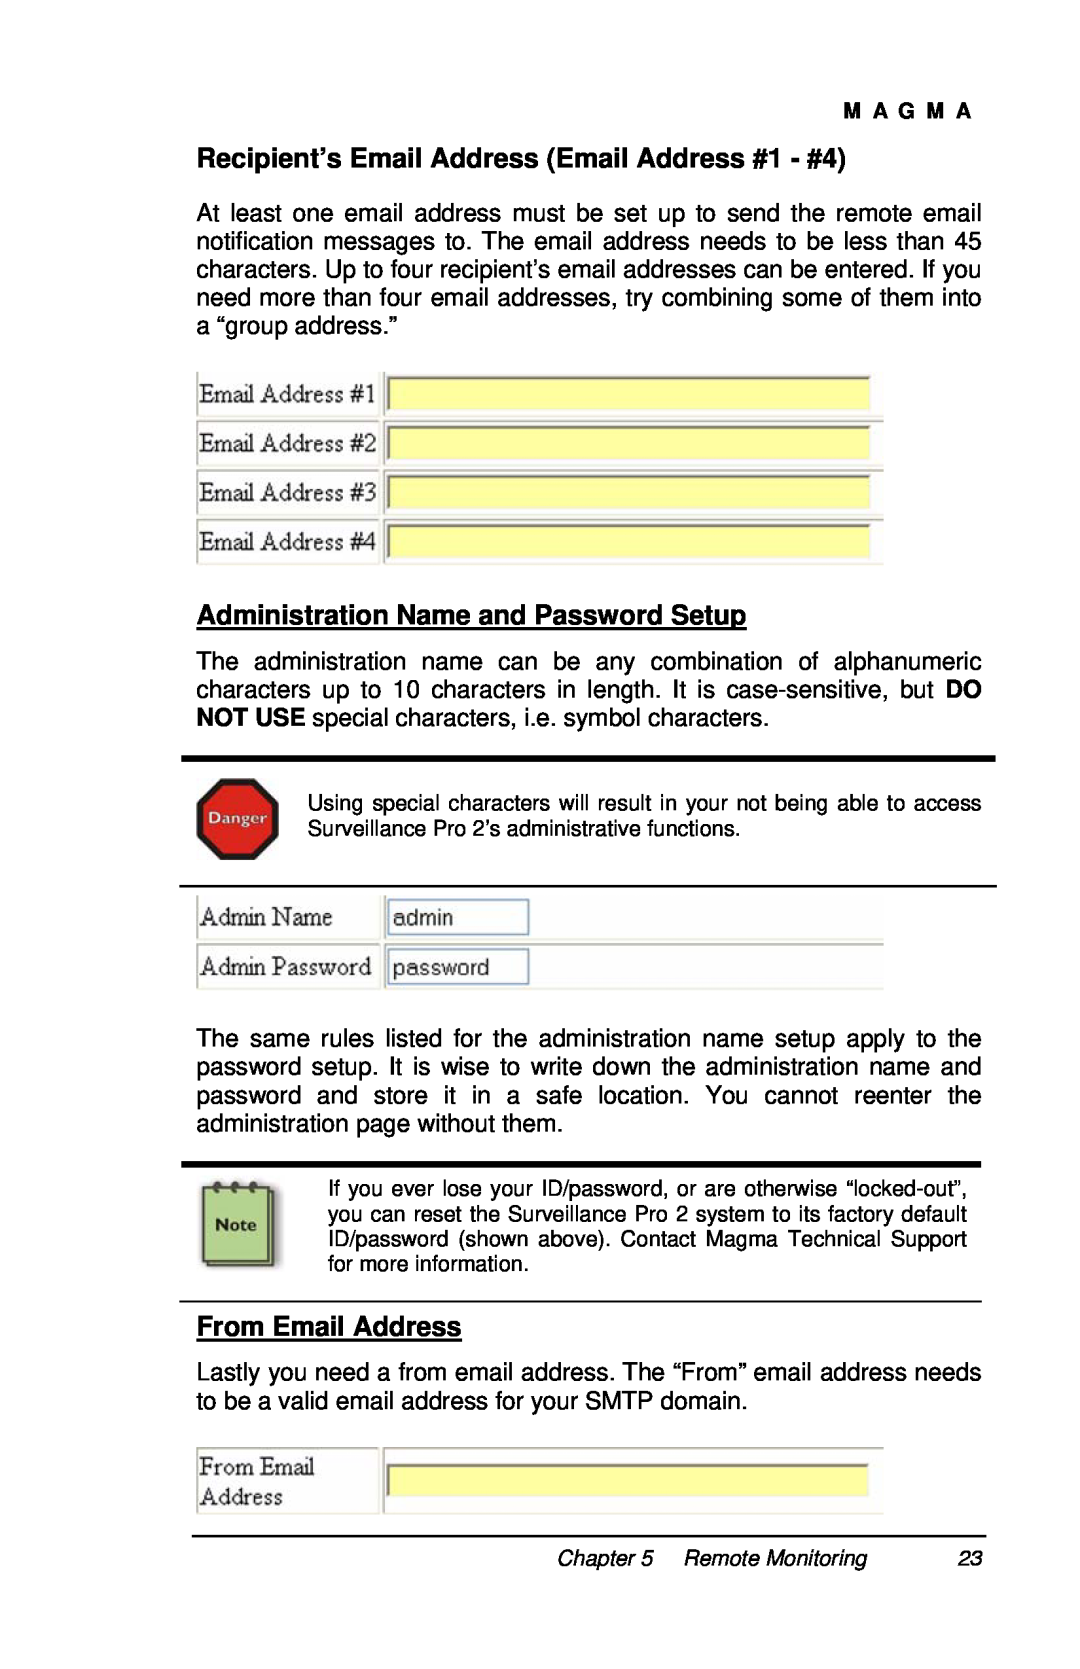 Magma P13RR-TEL user manual Recipient’s Email Address Email Address #1 - #4, Administration Name and Password Setup 